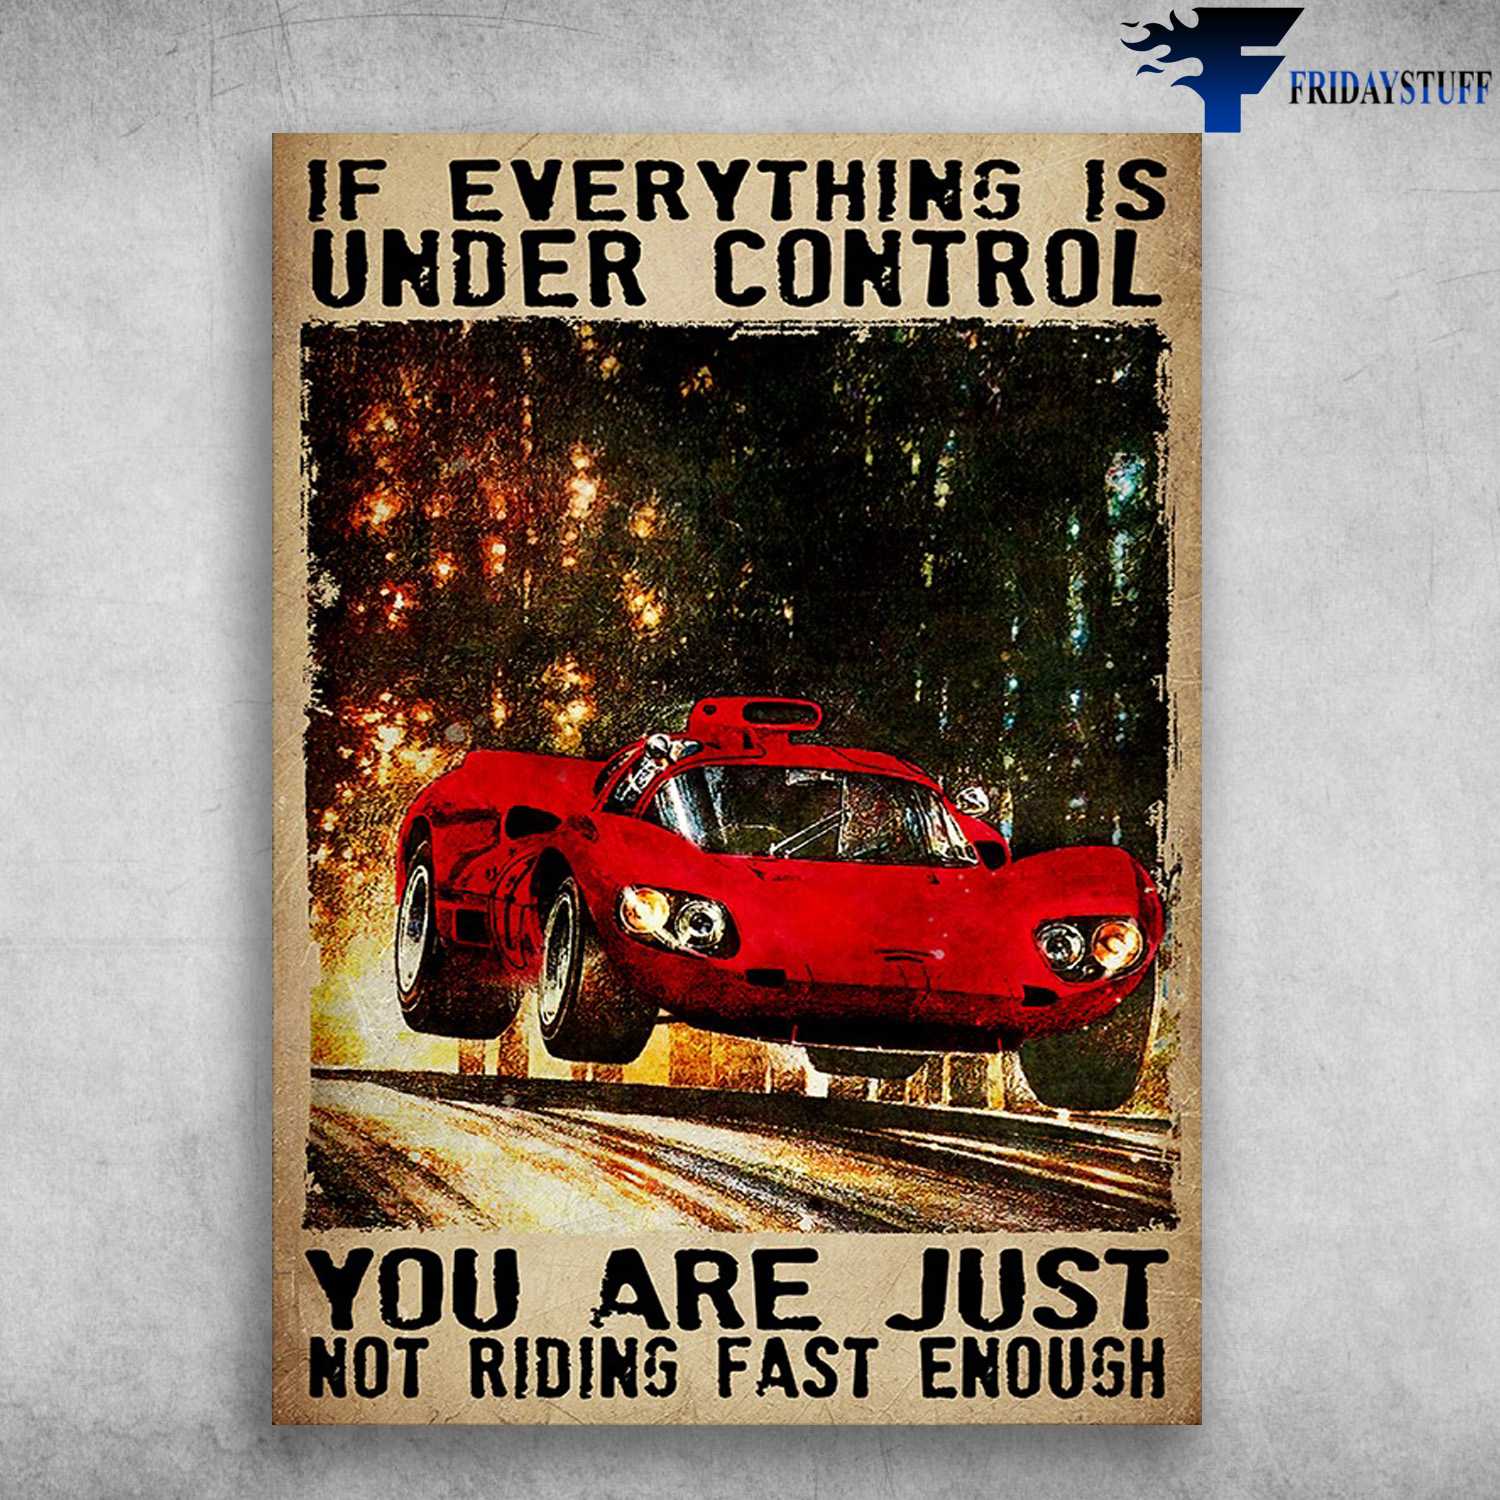 Racing Car - If Everything Is Under Control, You Are Just Not Riding Fast Enough